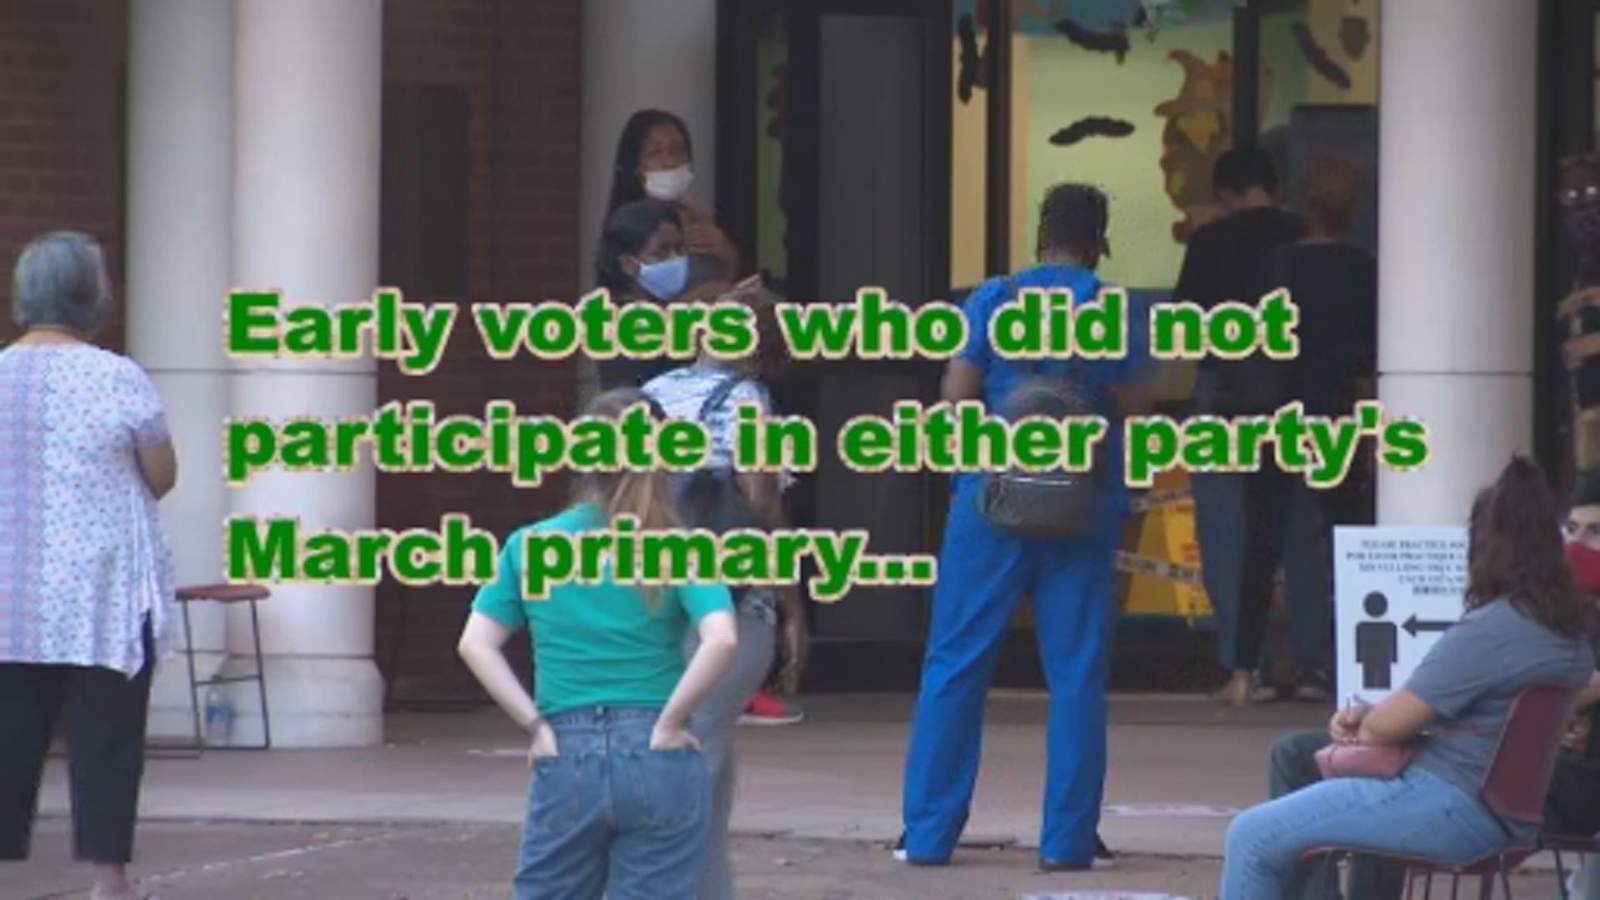 UH examines early voting data to see who’s voting where, which party is voting most so far